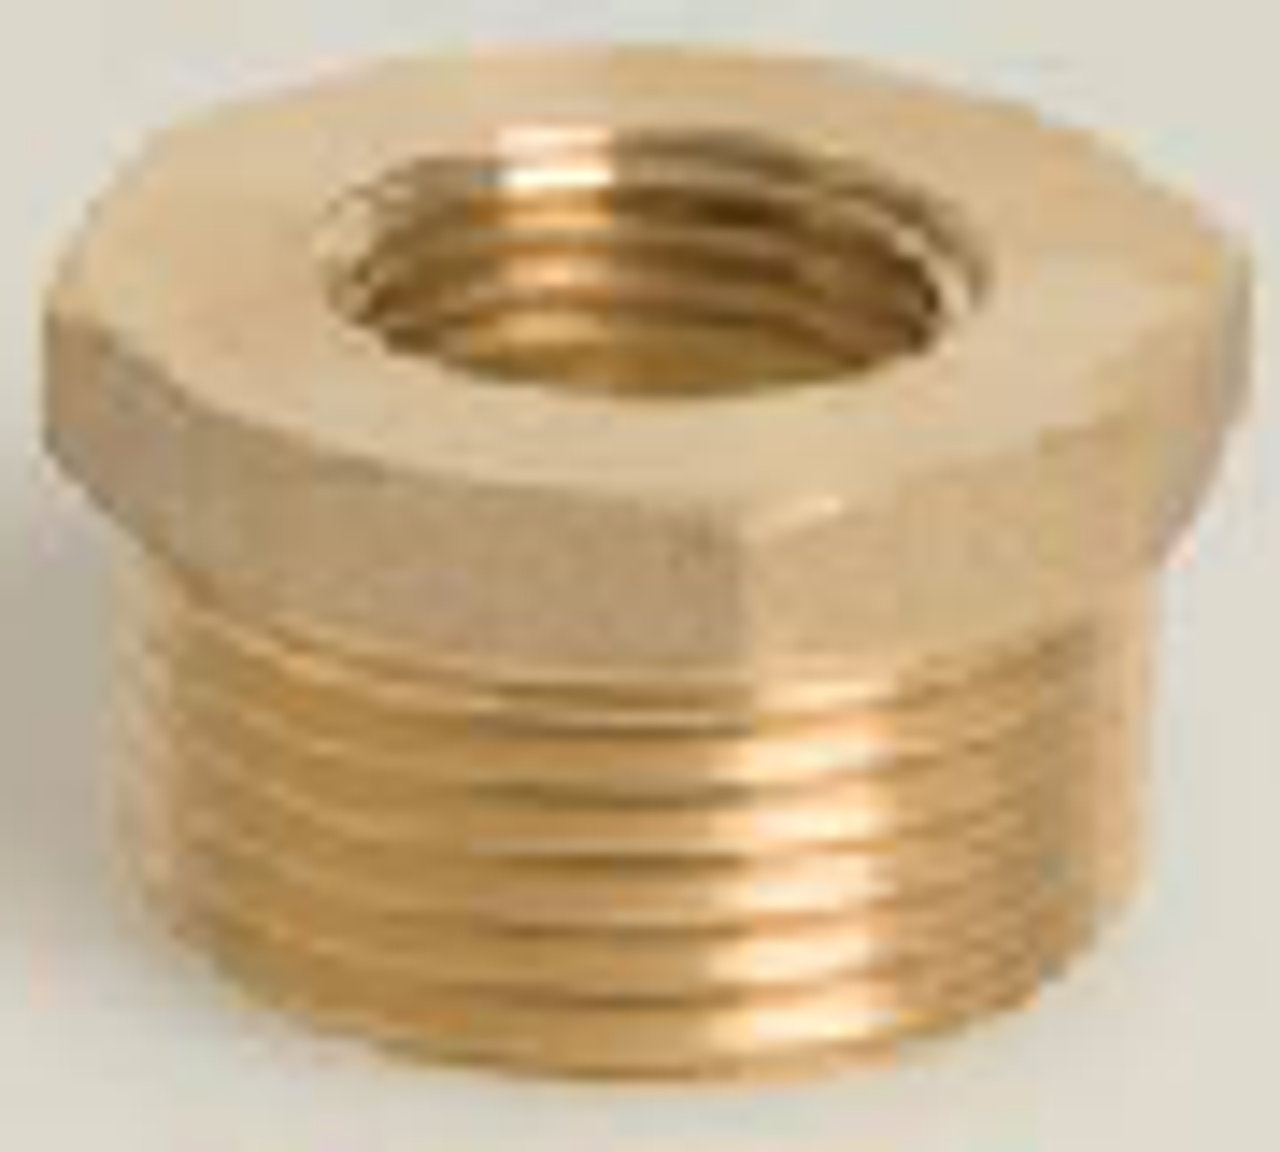 1/2x1/8 brass bush - Irrigation Online - Hortech Systems Ltd for all  irrigation systems and watering system needs